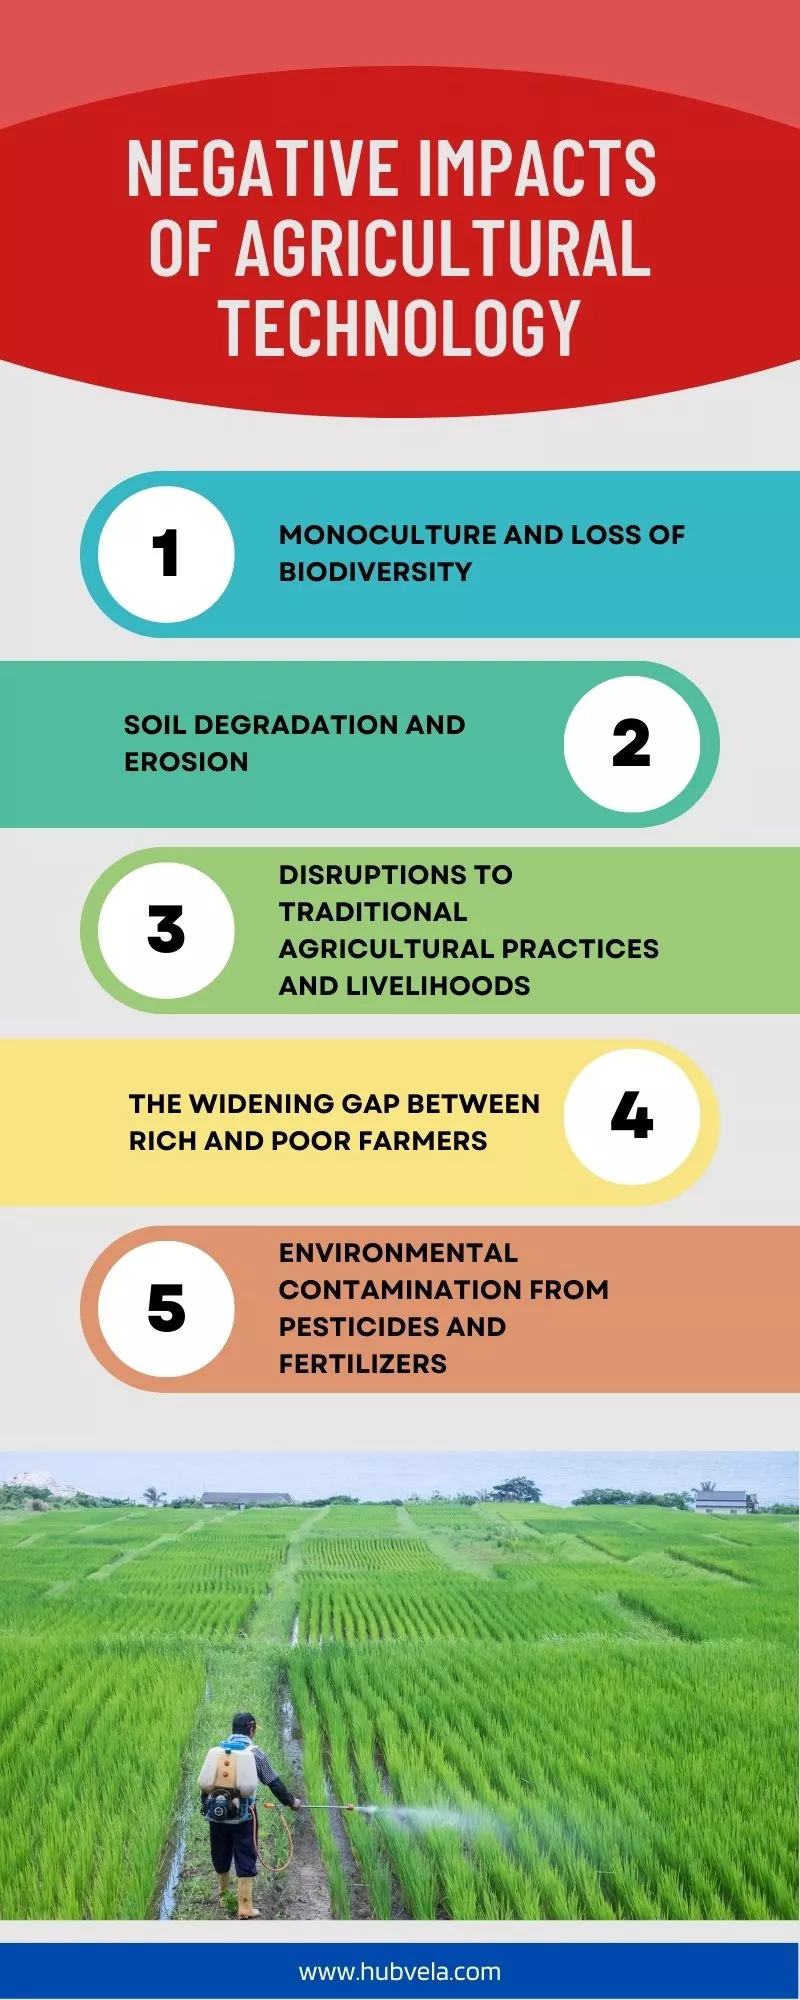 Negative Impacts of Agricultural Technology infographic